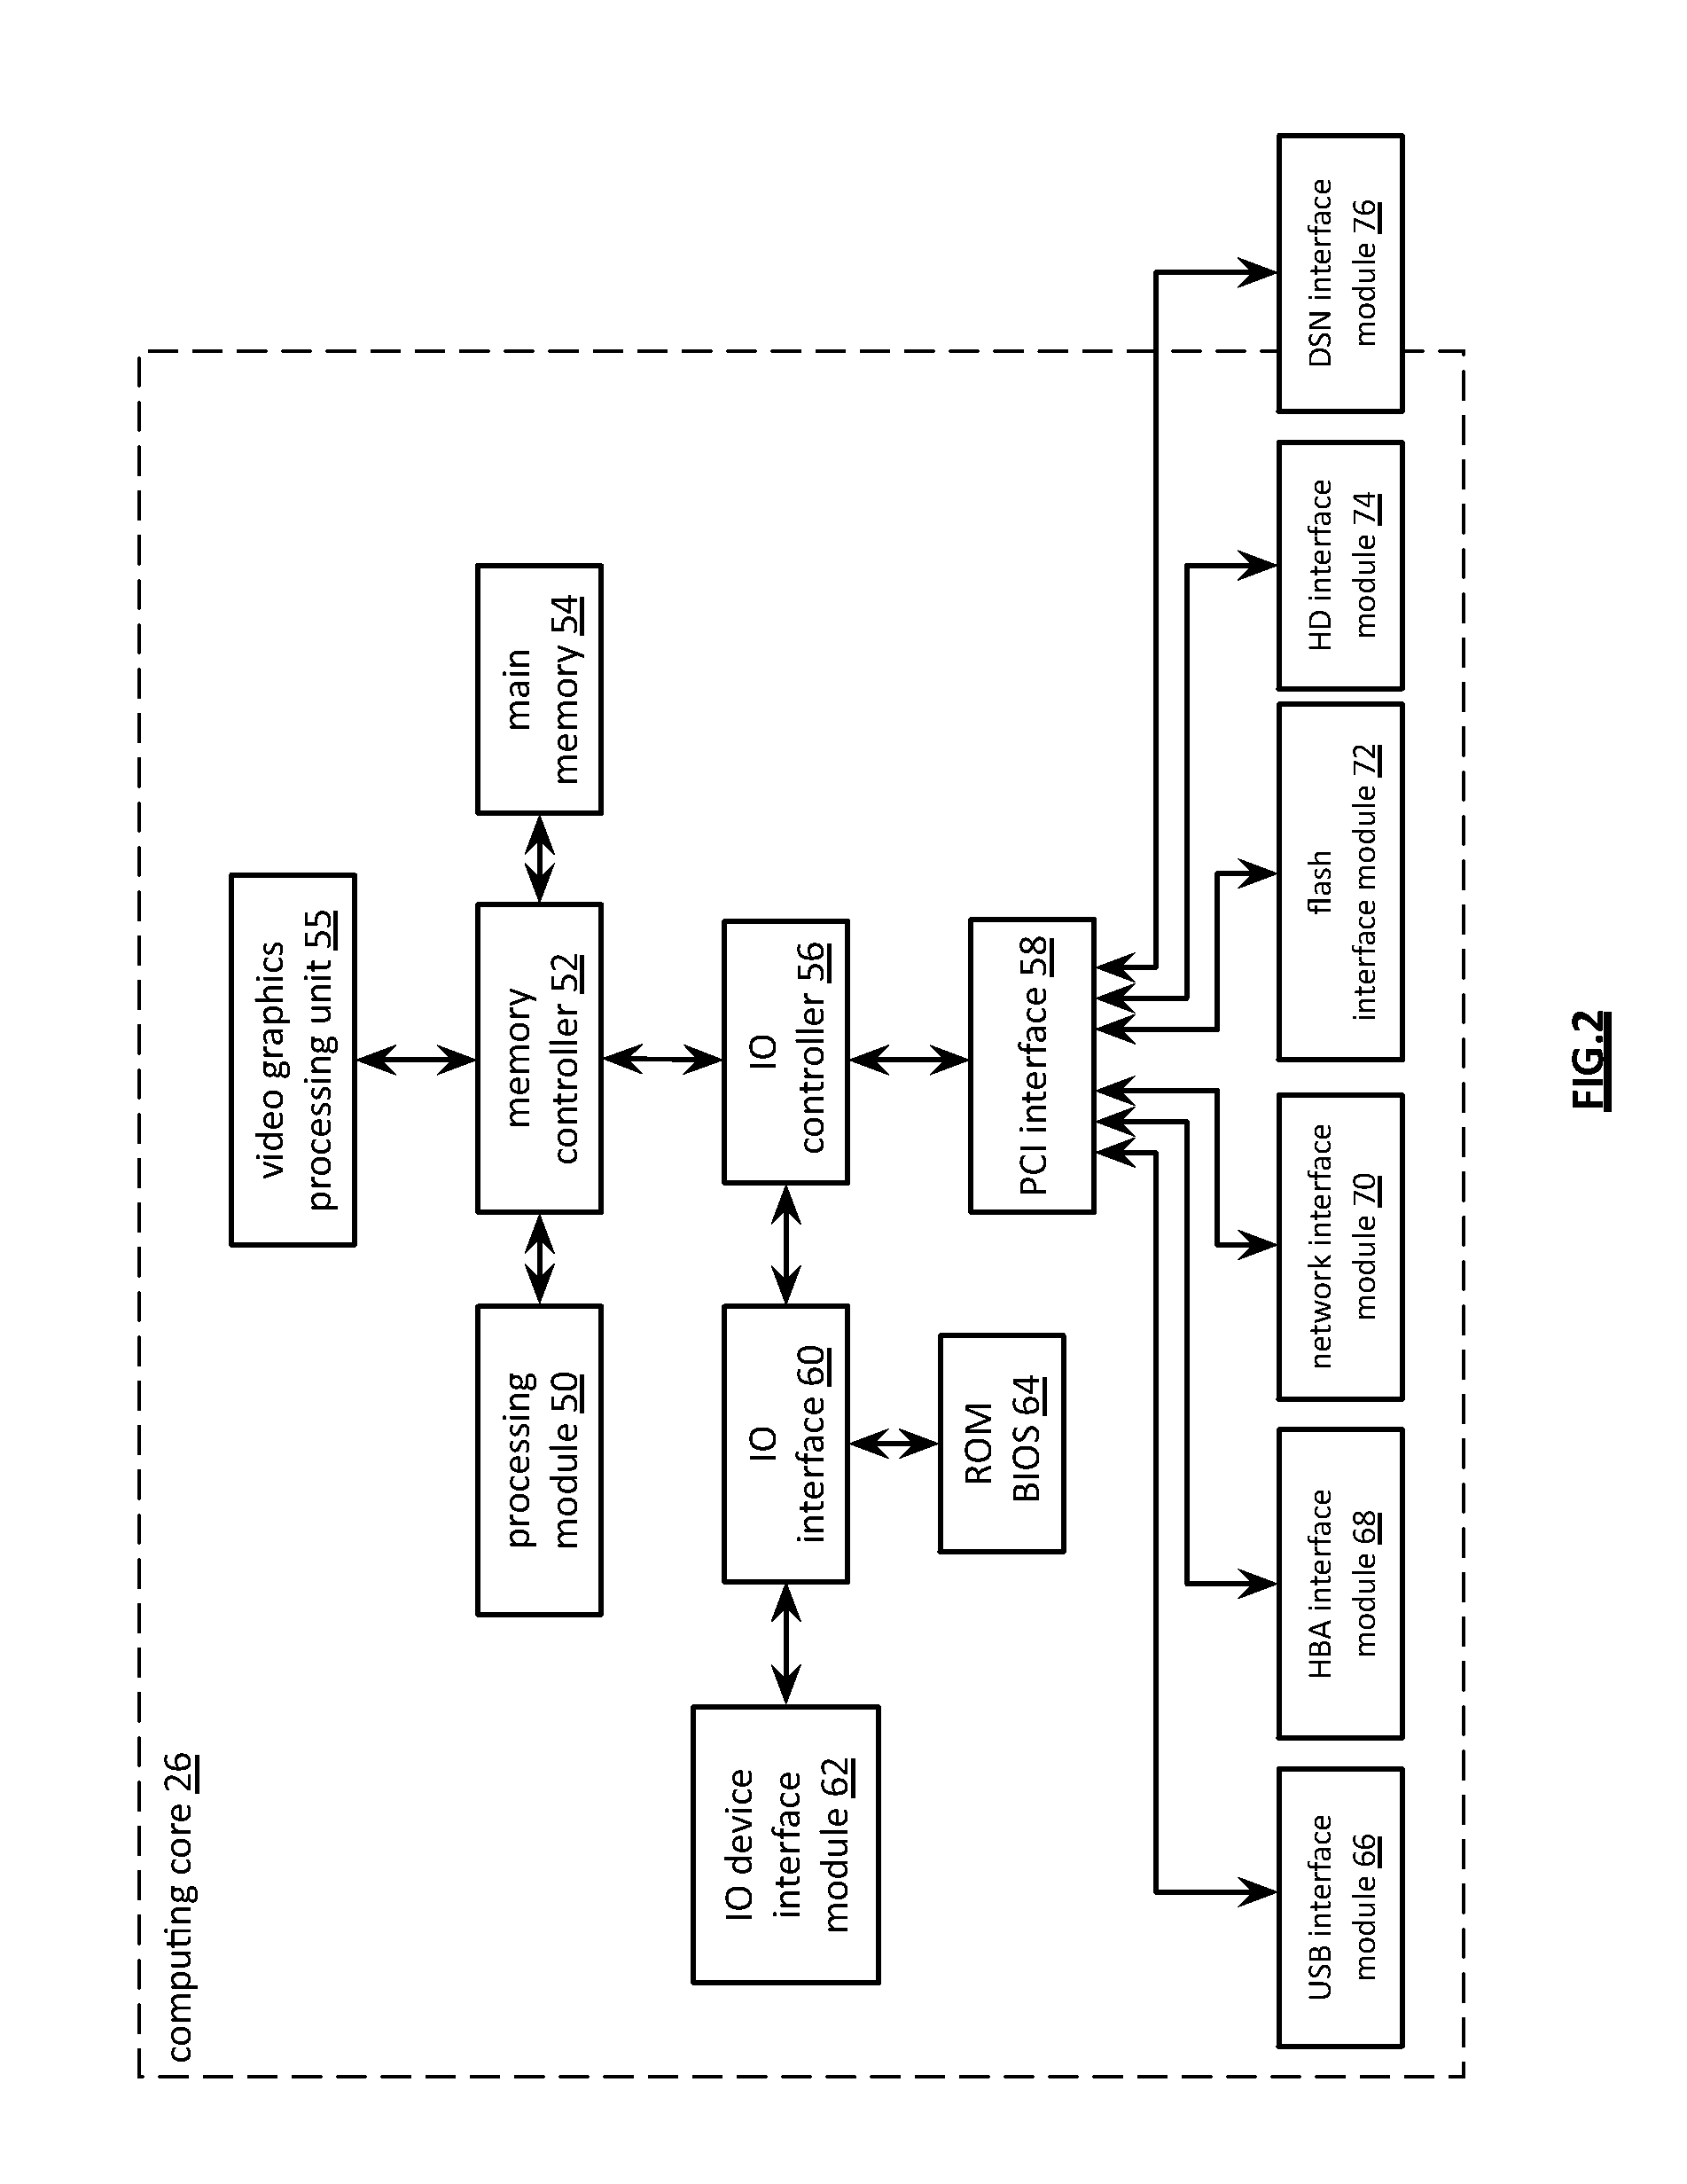 Distributed storage network for modification of a data object